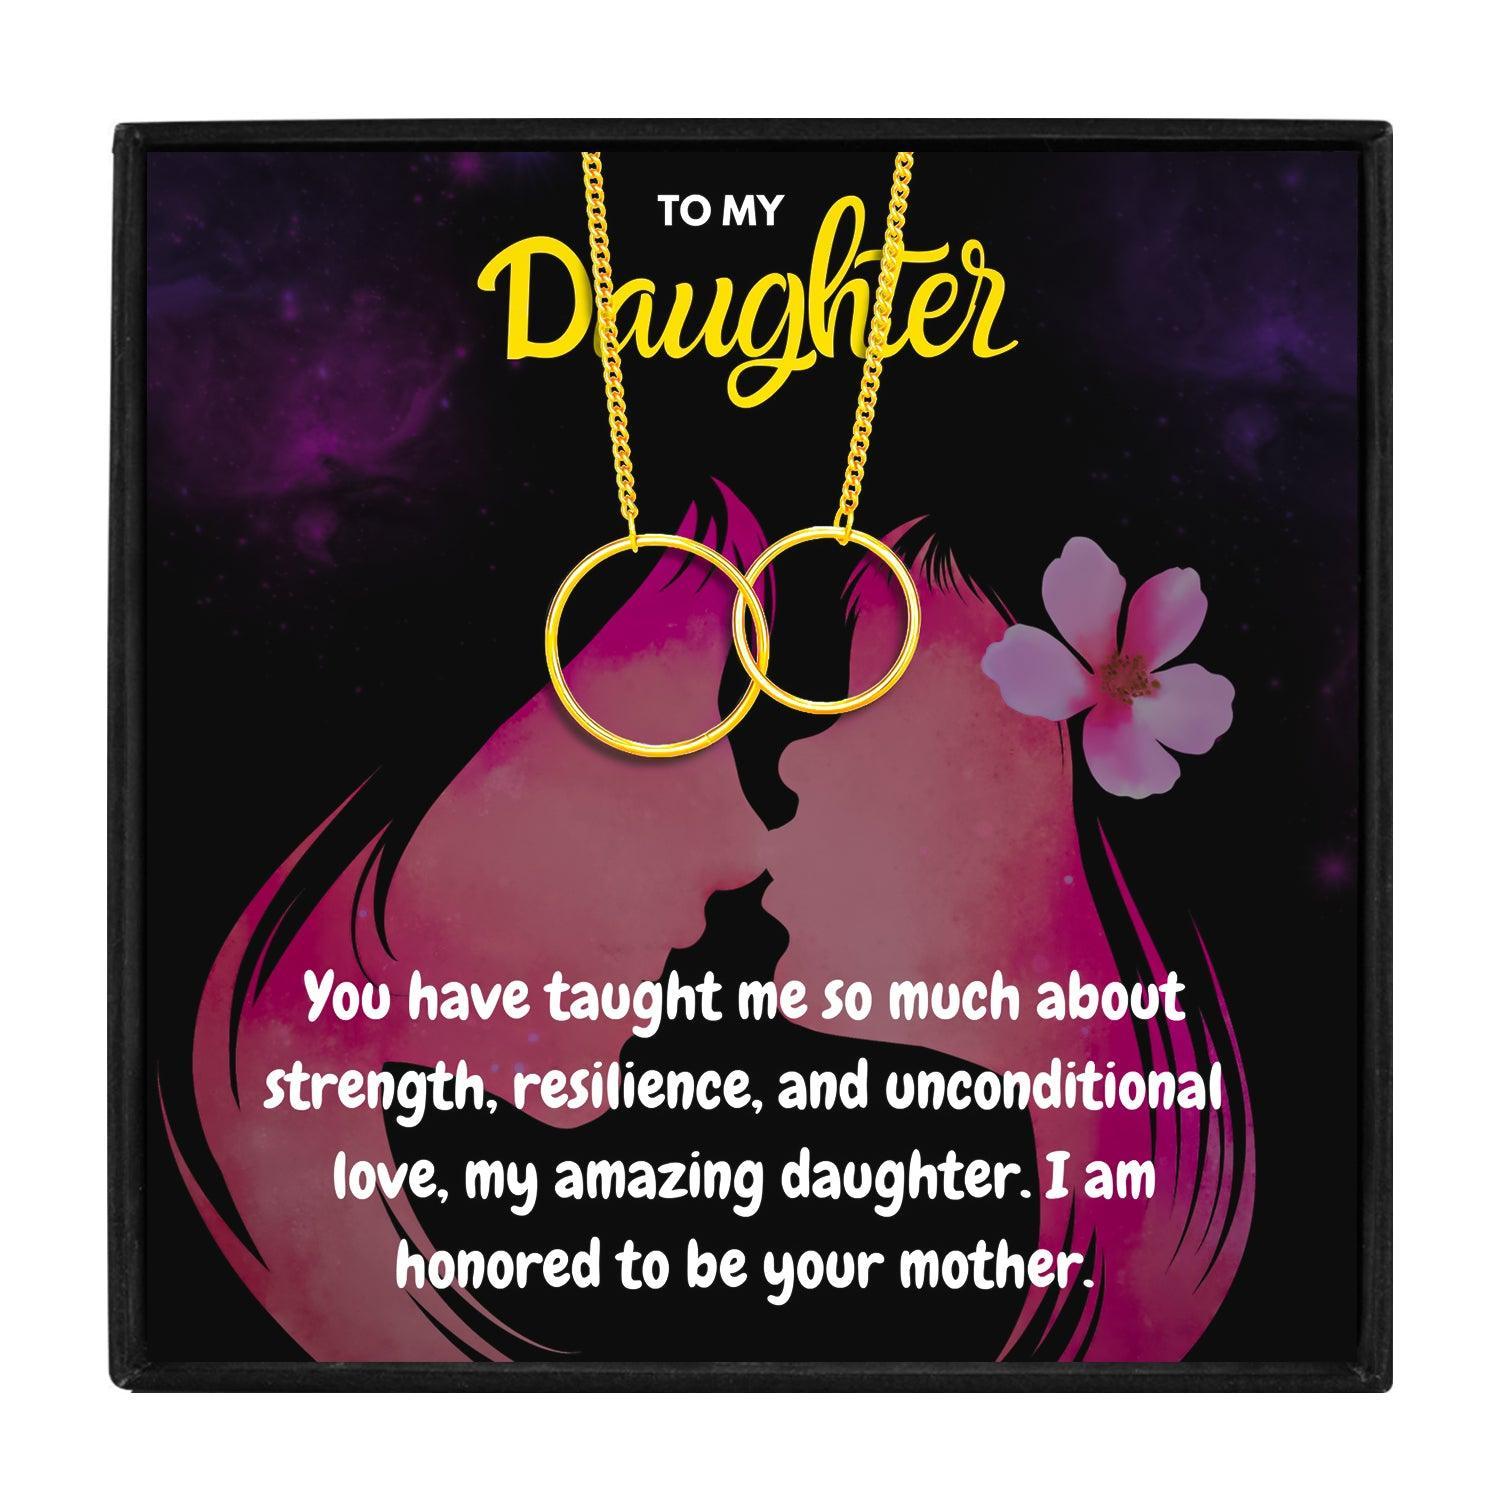 Sentimental Mom Gifts from Daughters - Meaningful for Express Your